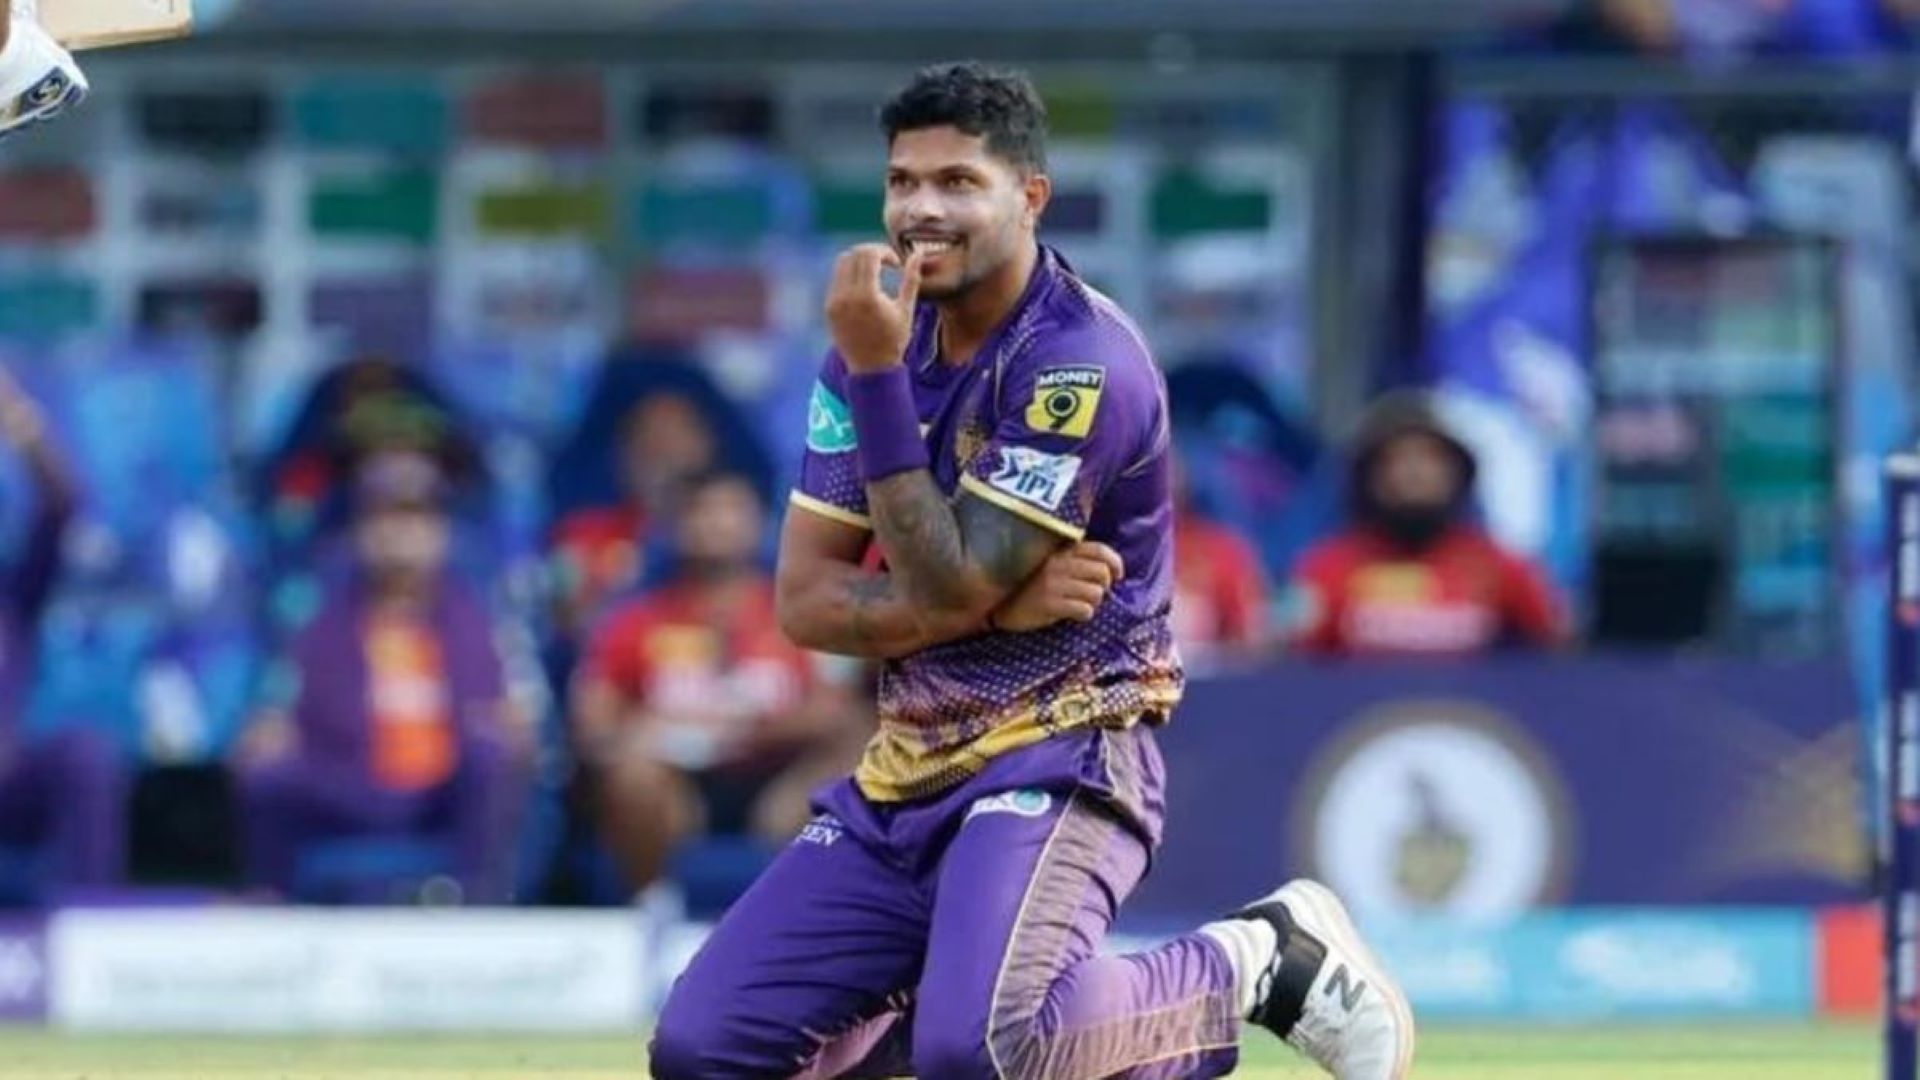 Umesh Yadav has been expensive in the powerplay for KKR this season.